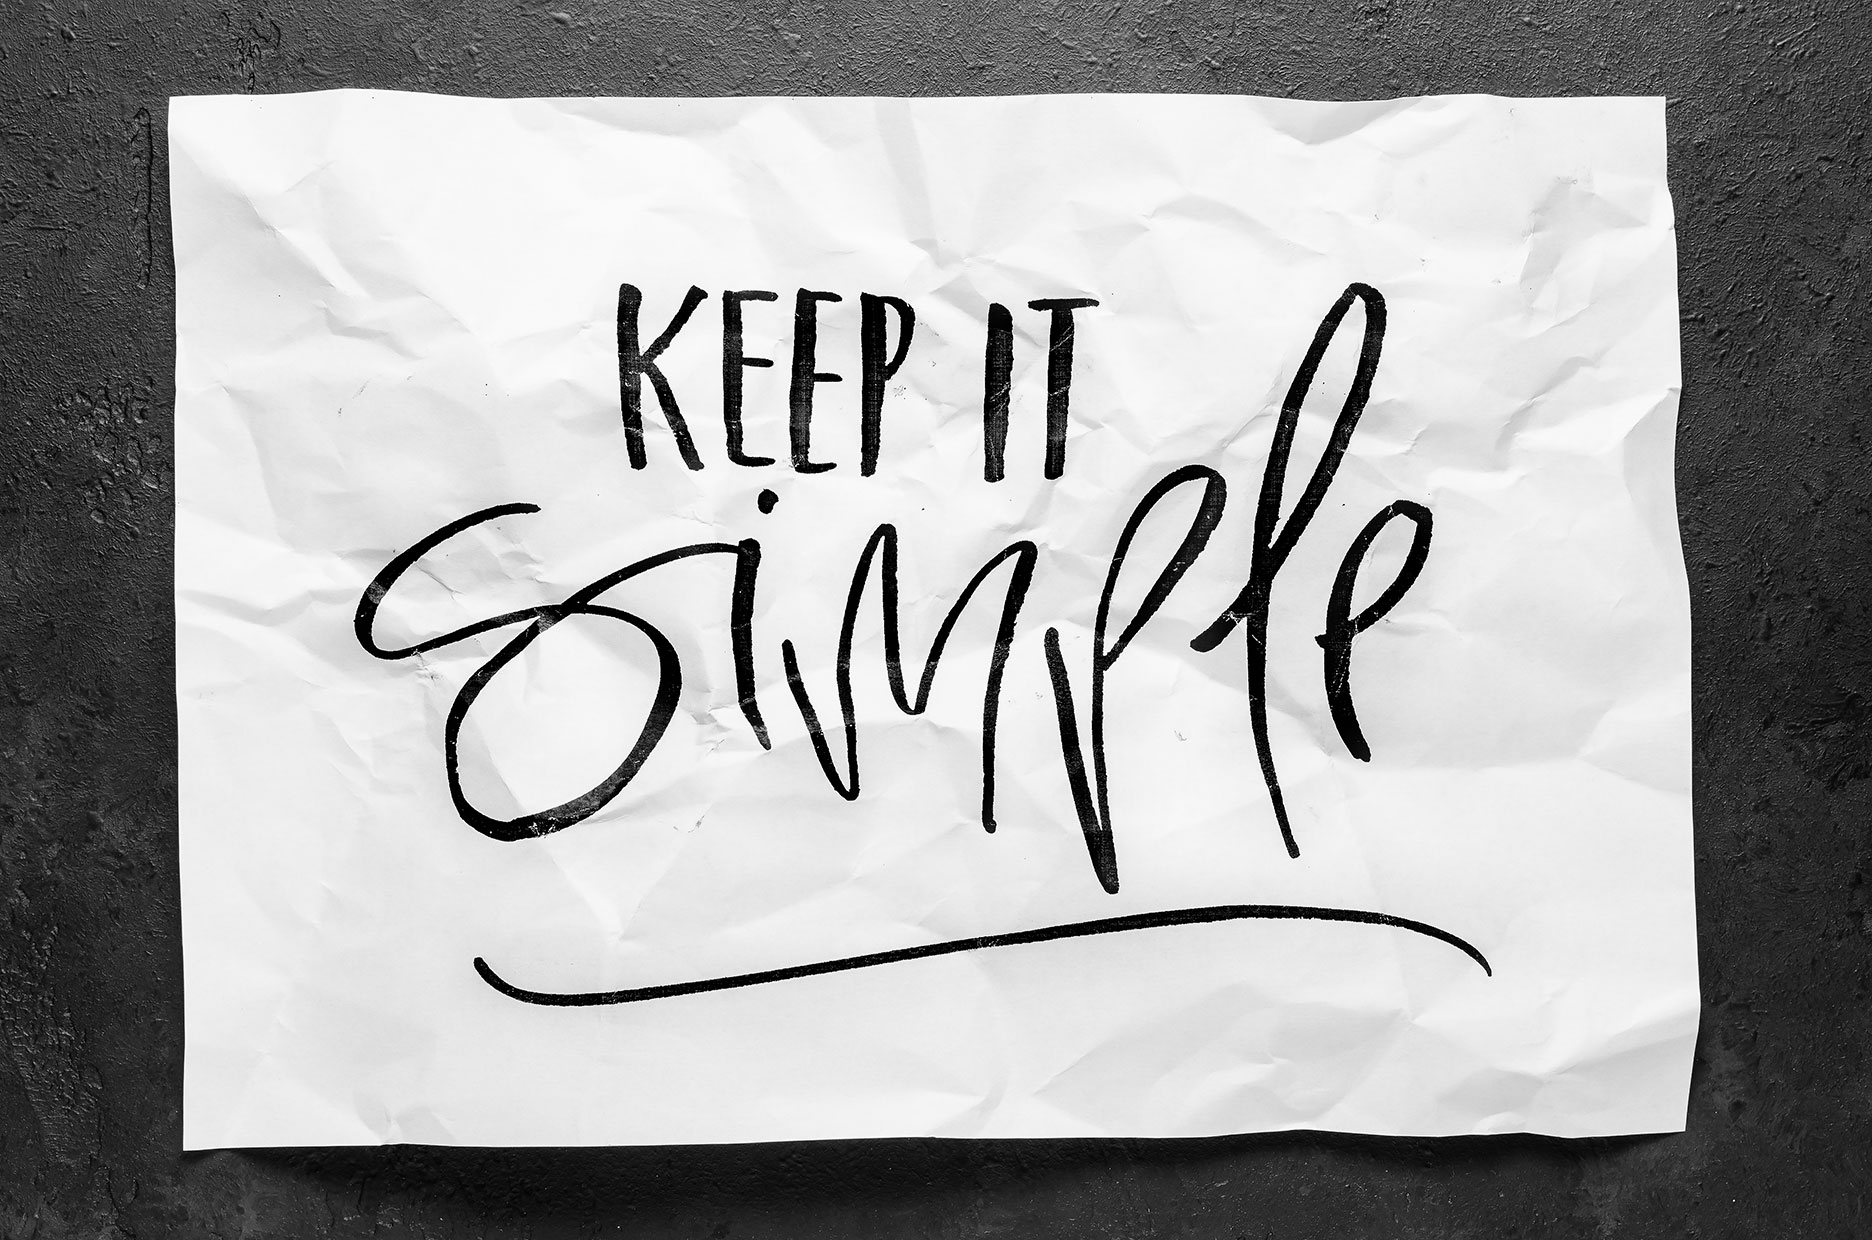 Keep it simple written on a page